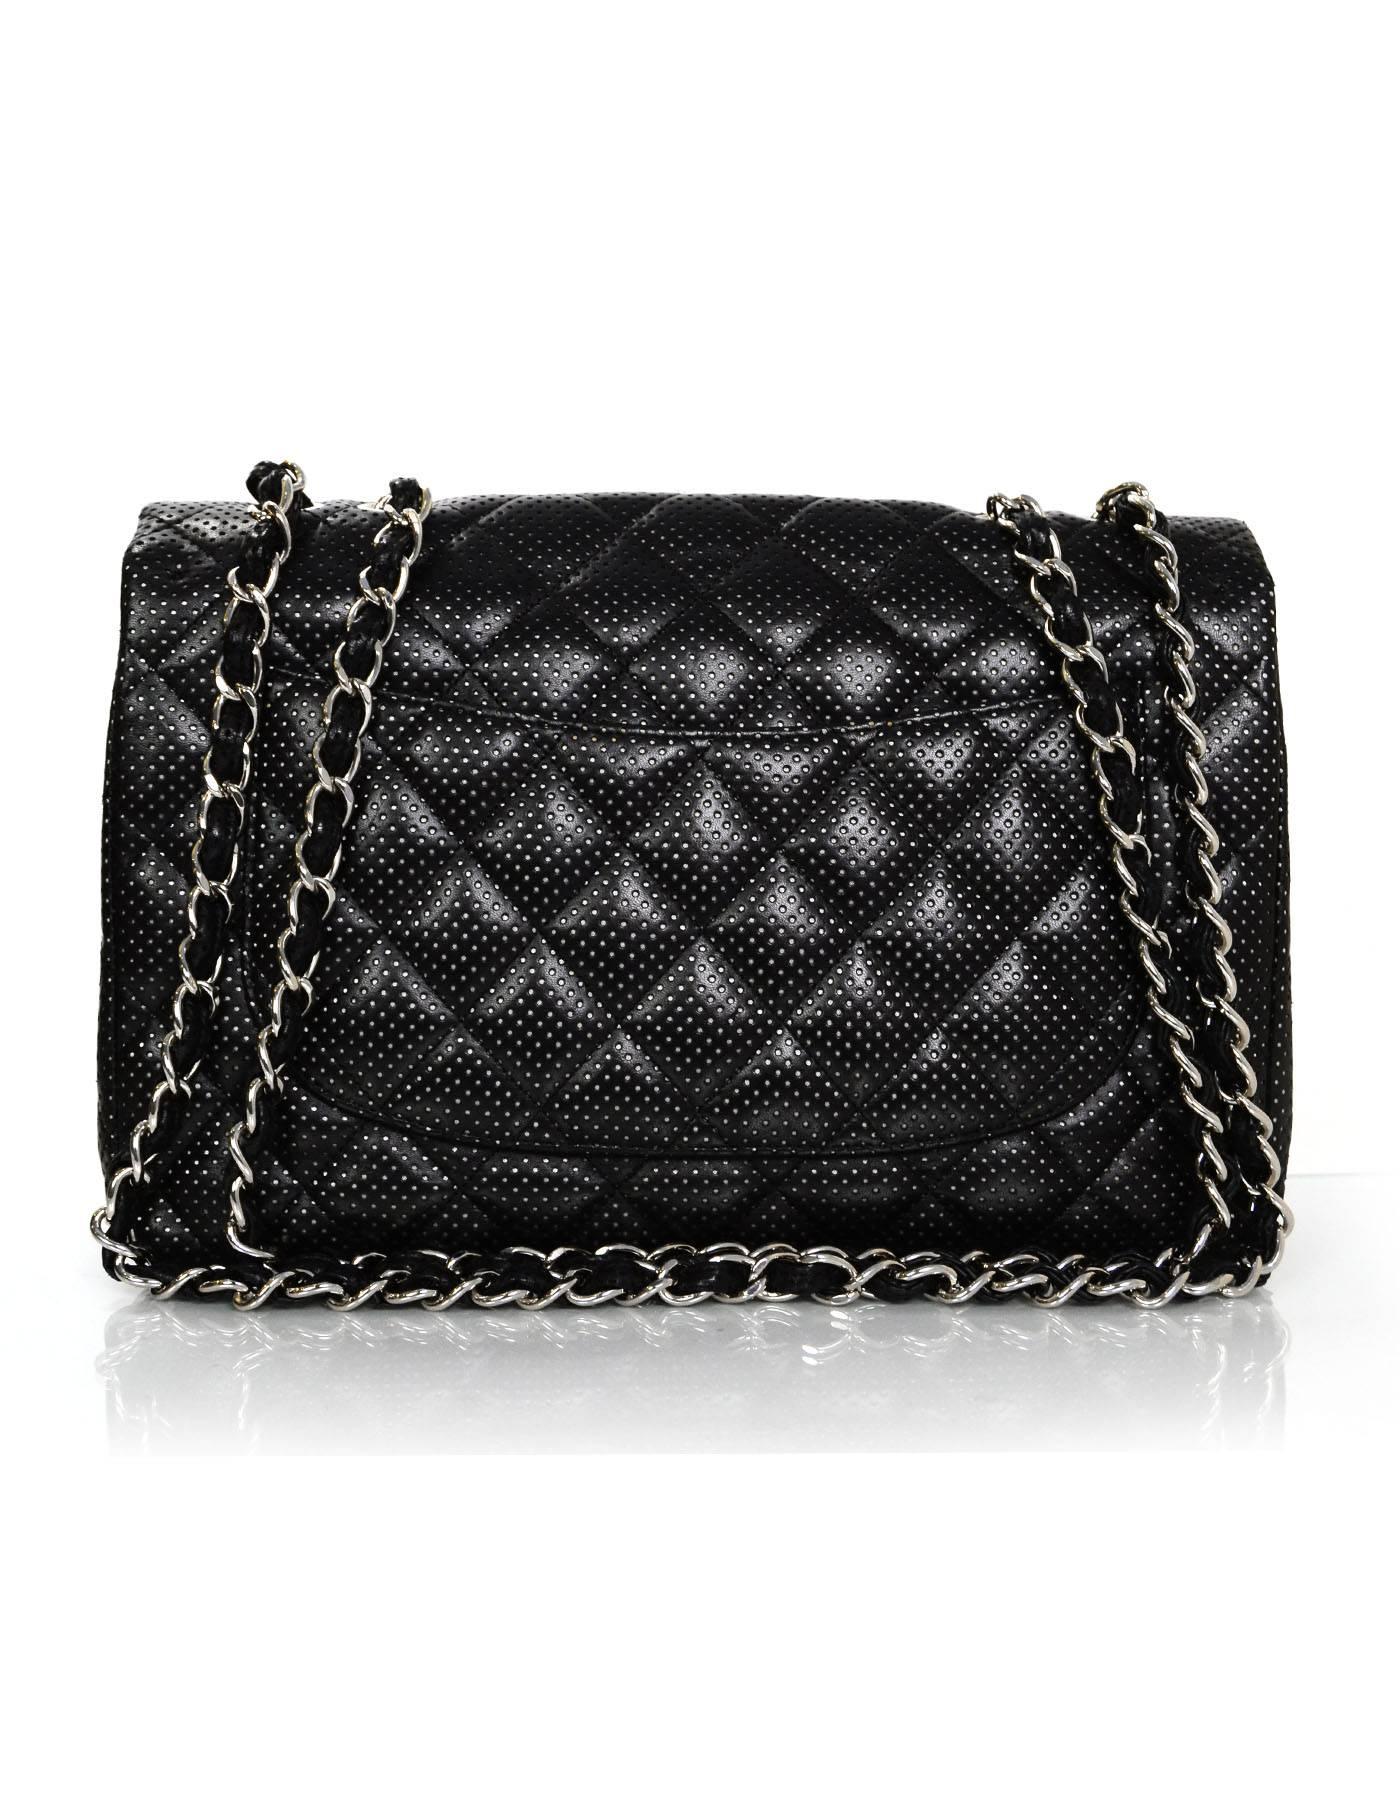 Chanel Black Perforated Jumbo Classic Flap Bag
Features adjustable shoulder strap

Made In: France
Year of Production: 2006
Color: Black
Hardware: Silvertone
Materials: Leather
Lining: Black leather
Closure/Opening: Single flap top with CC